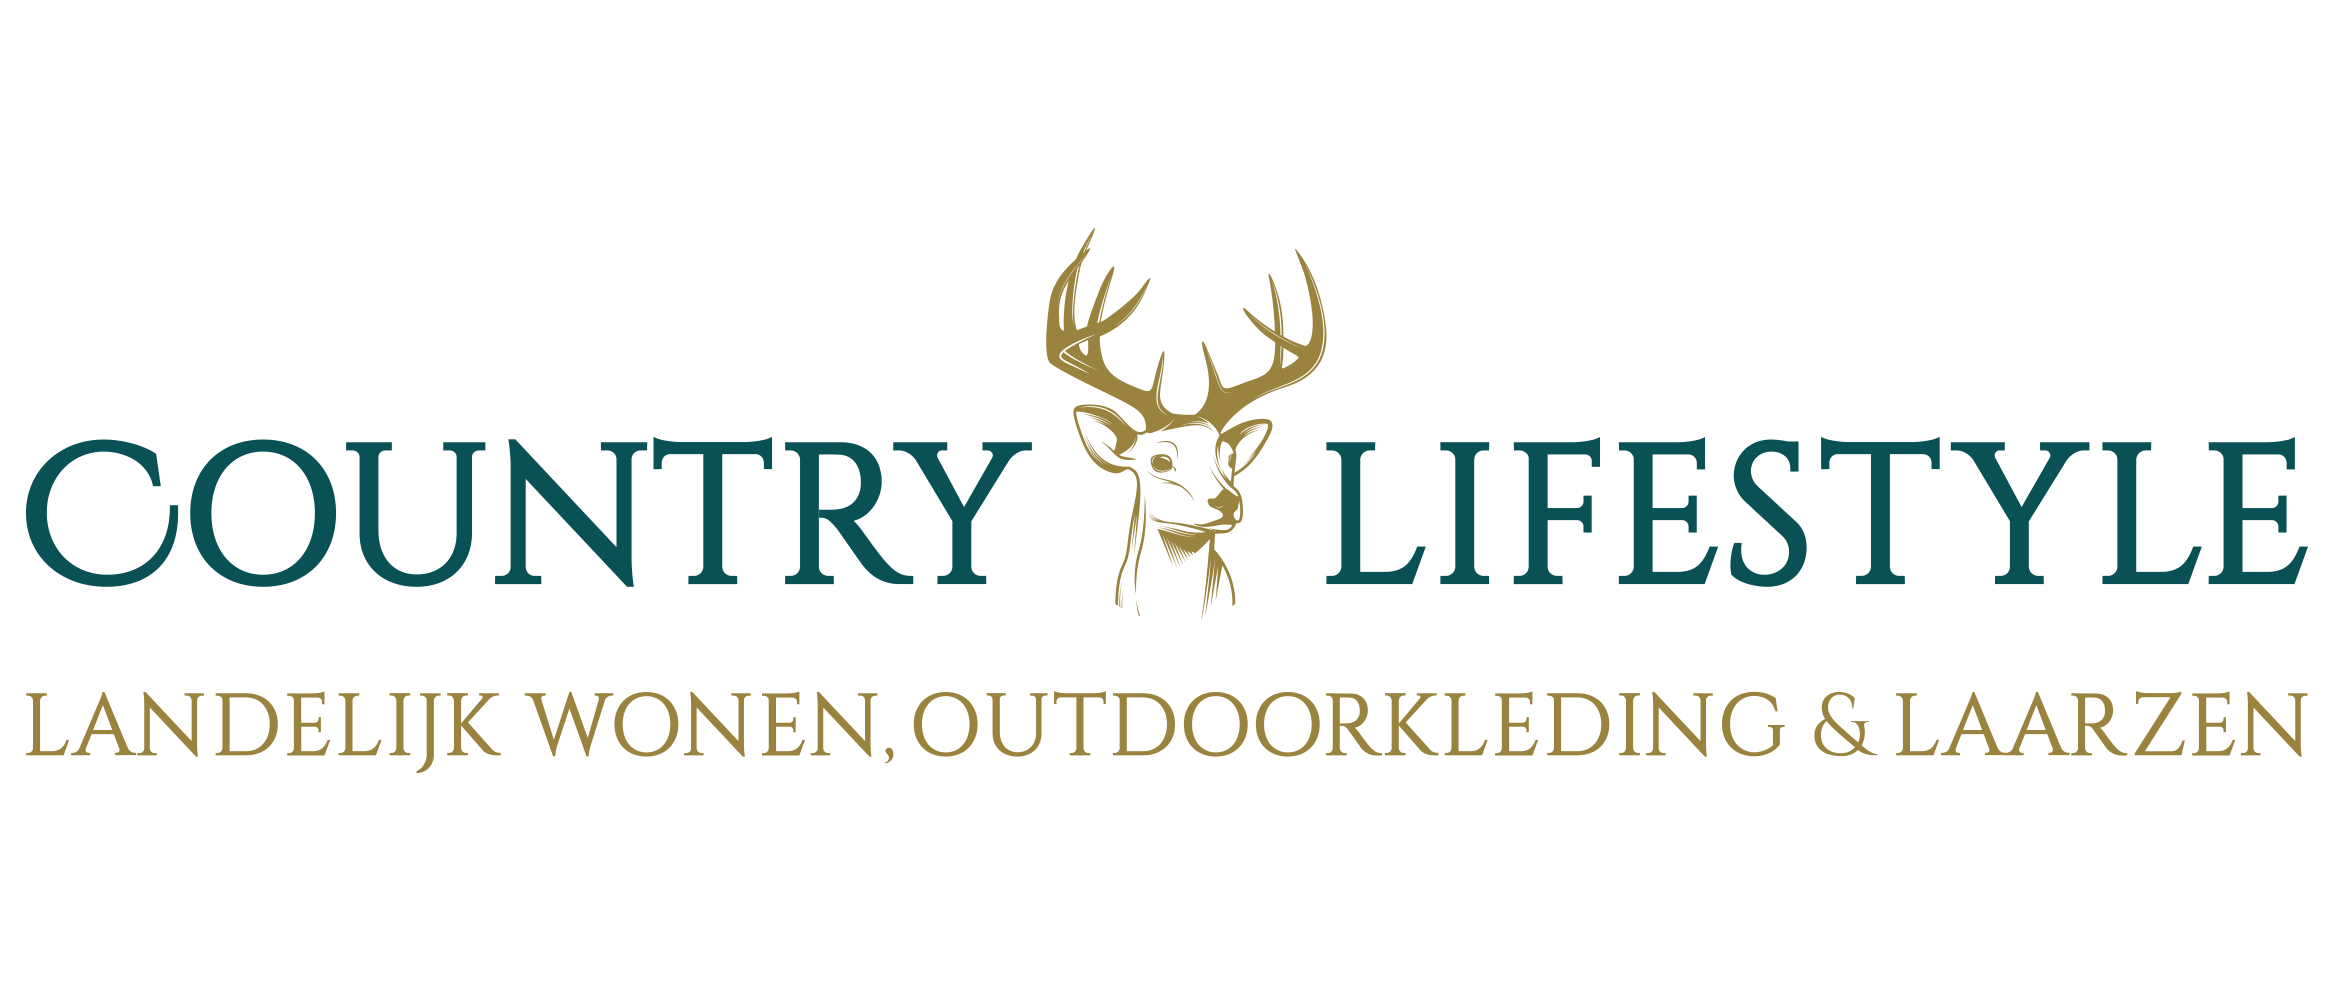 Countrylifestyle.nl